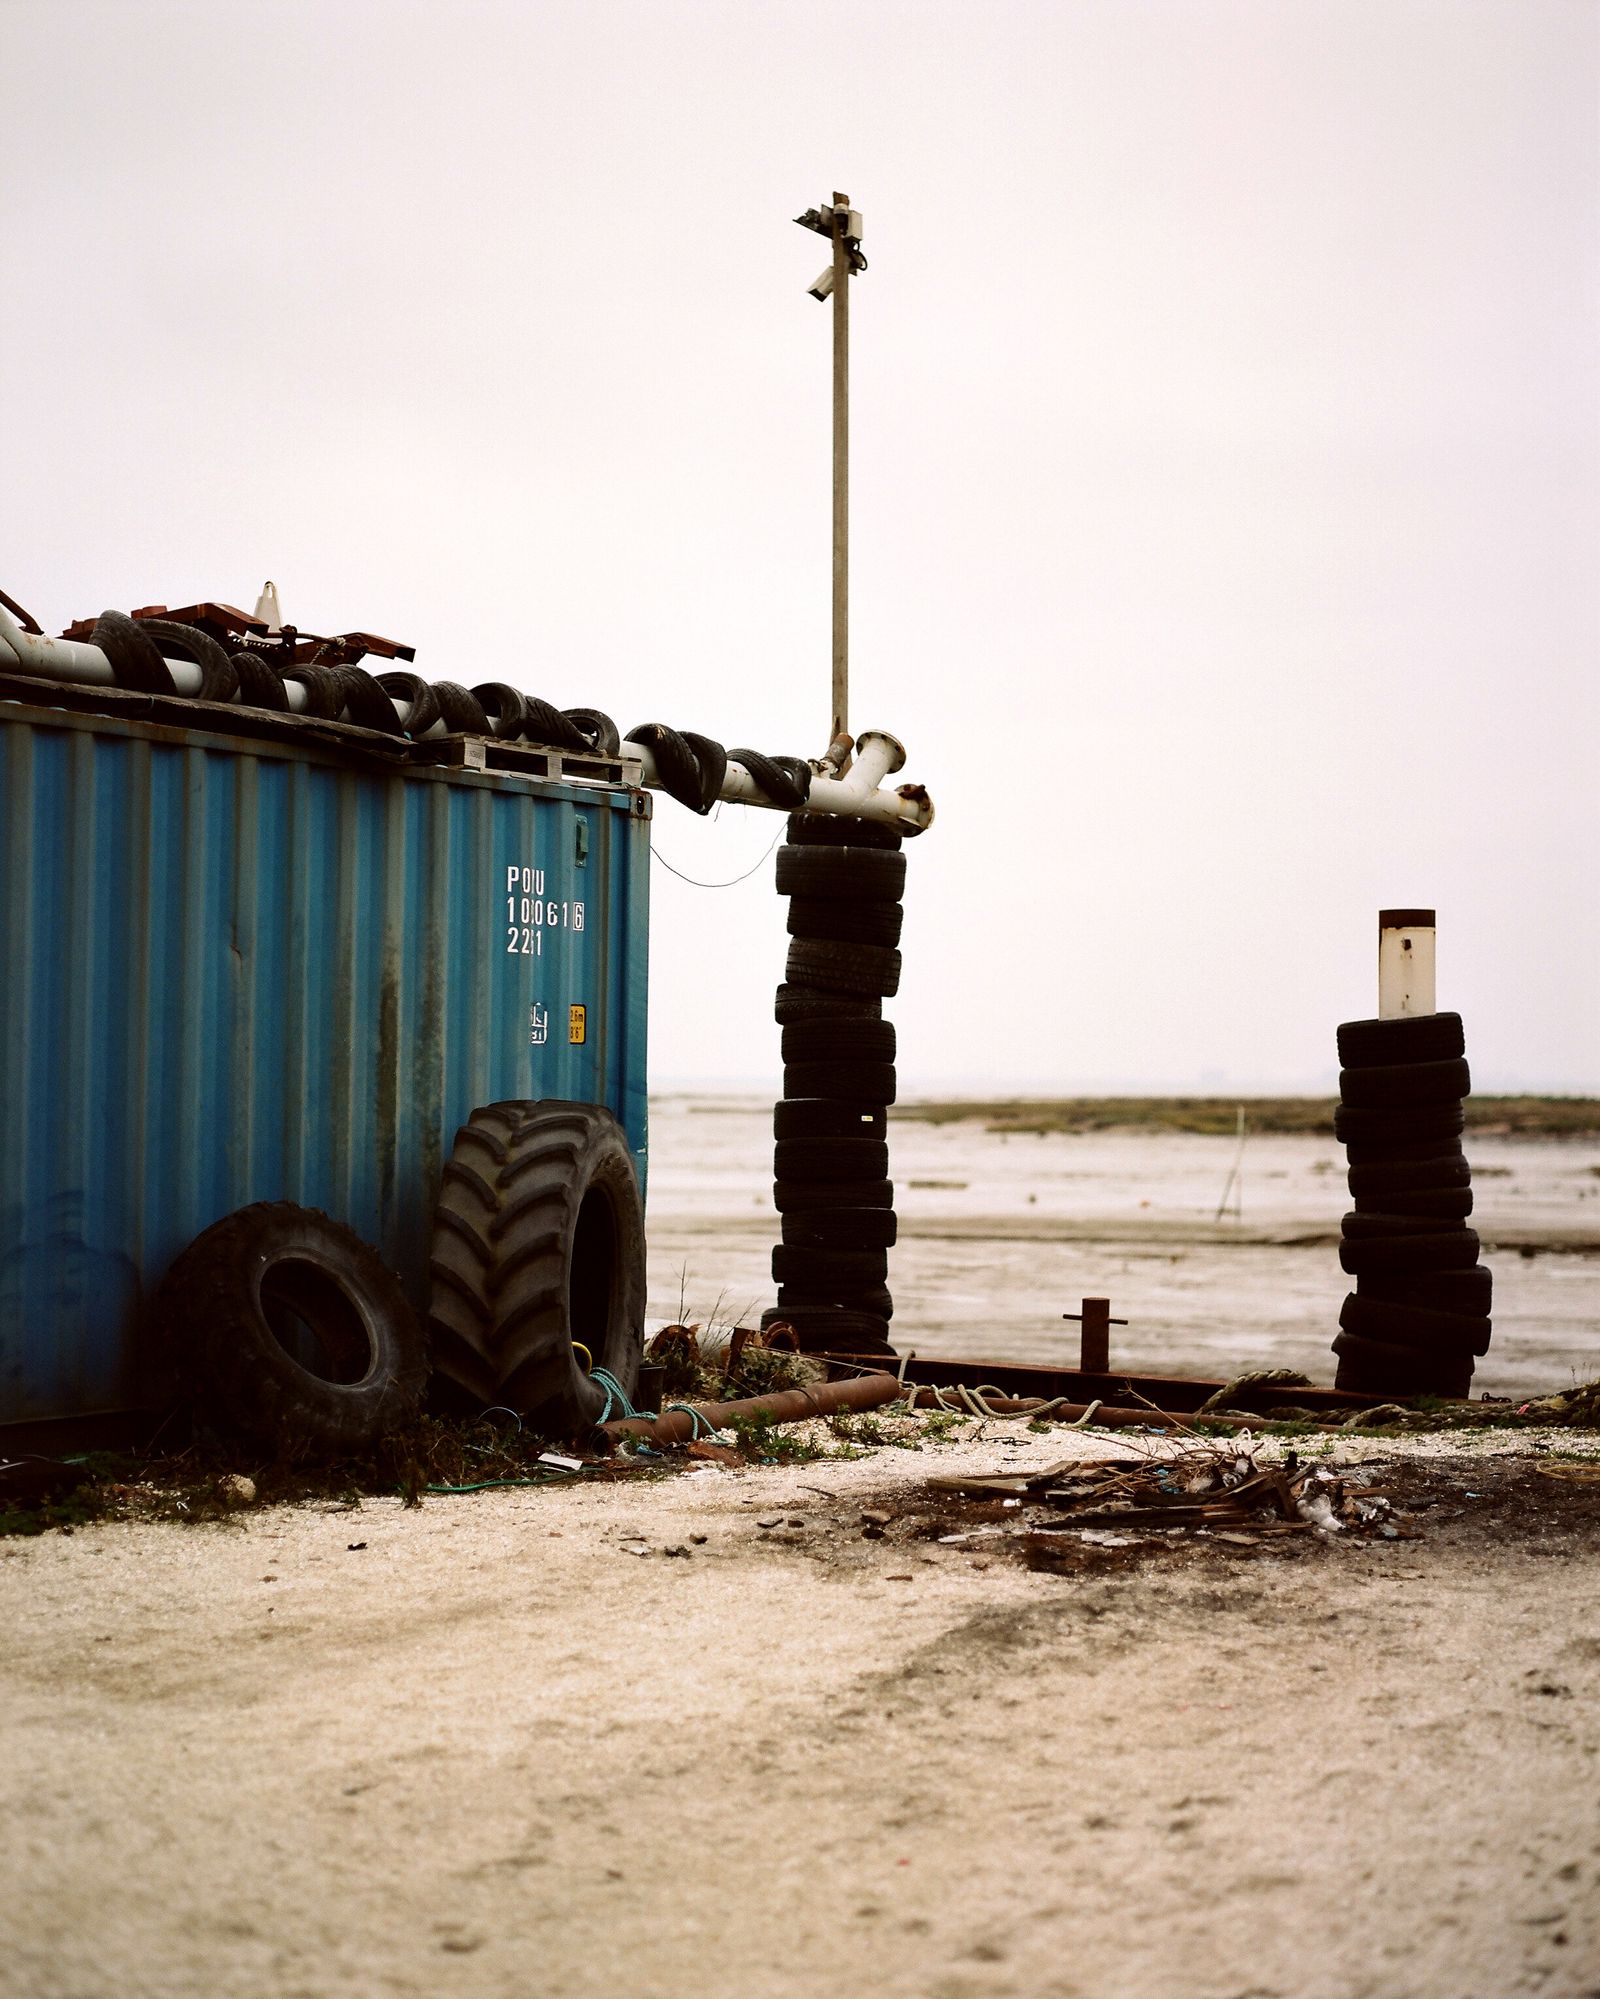 © Giulia Savorelli - Image from the Estuary English photography project